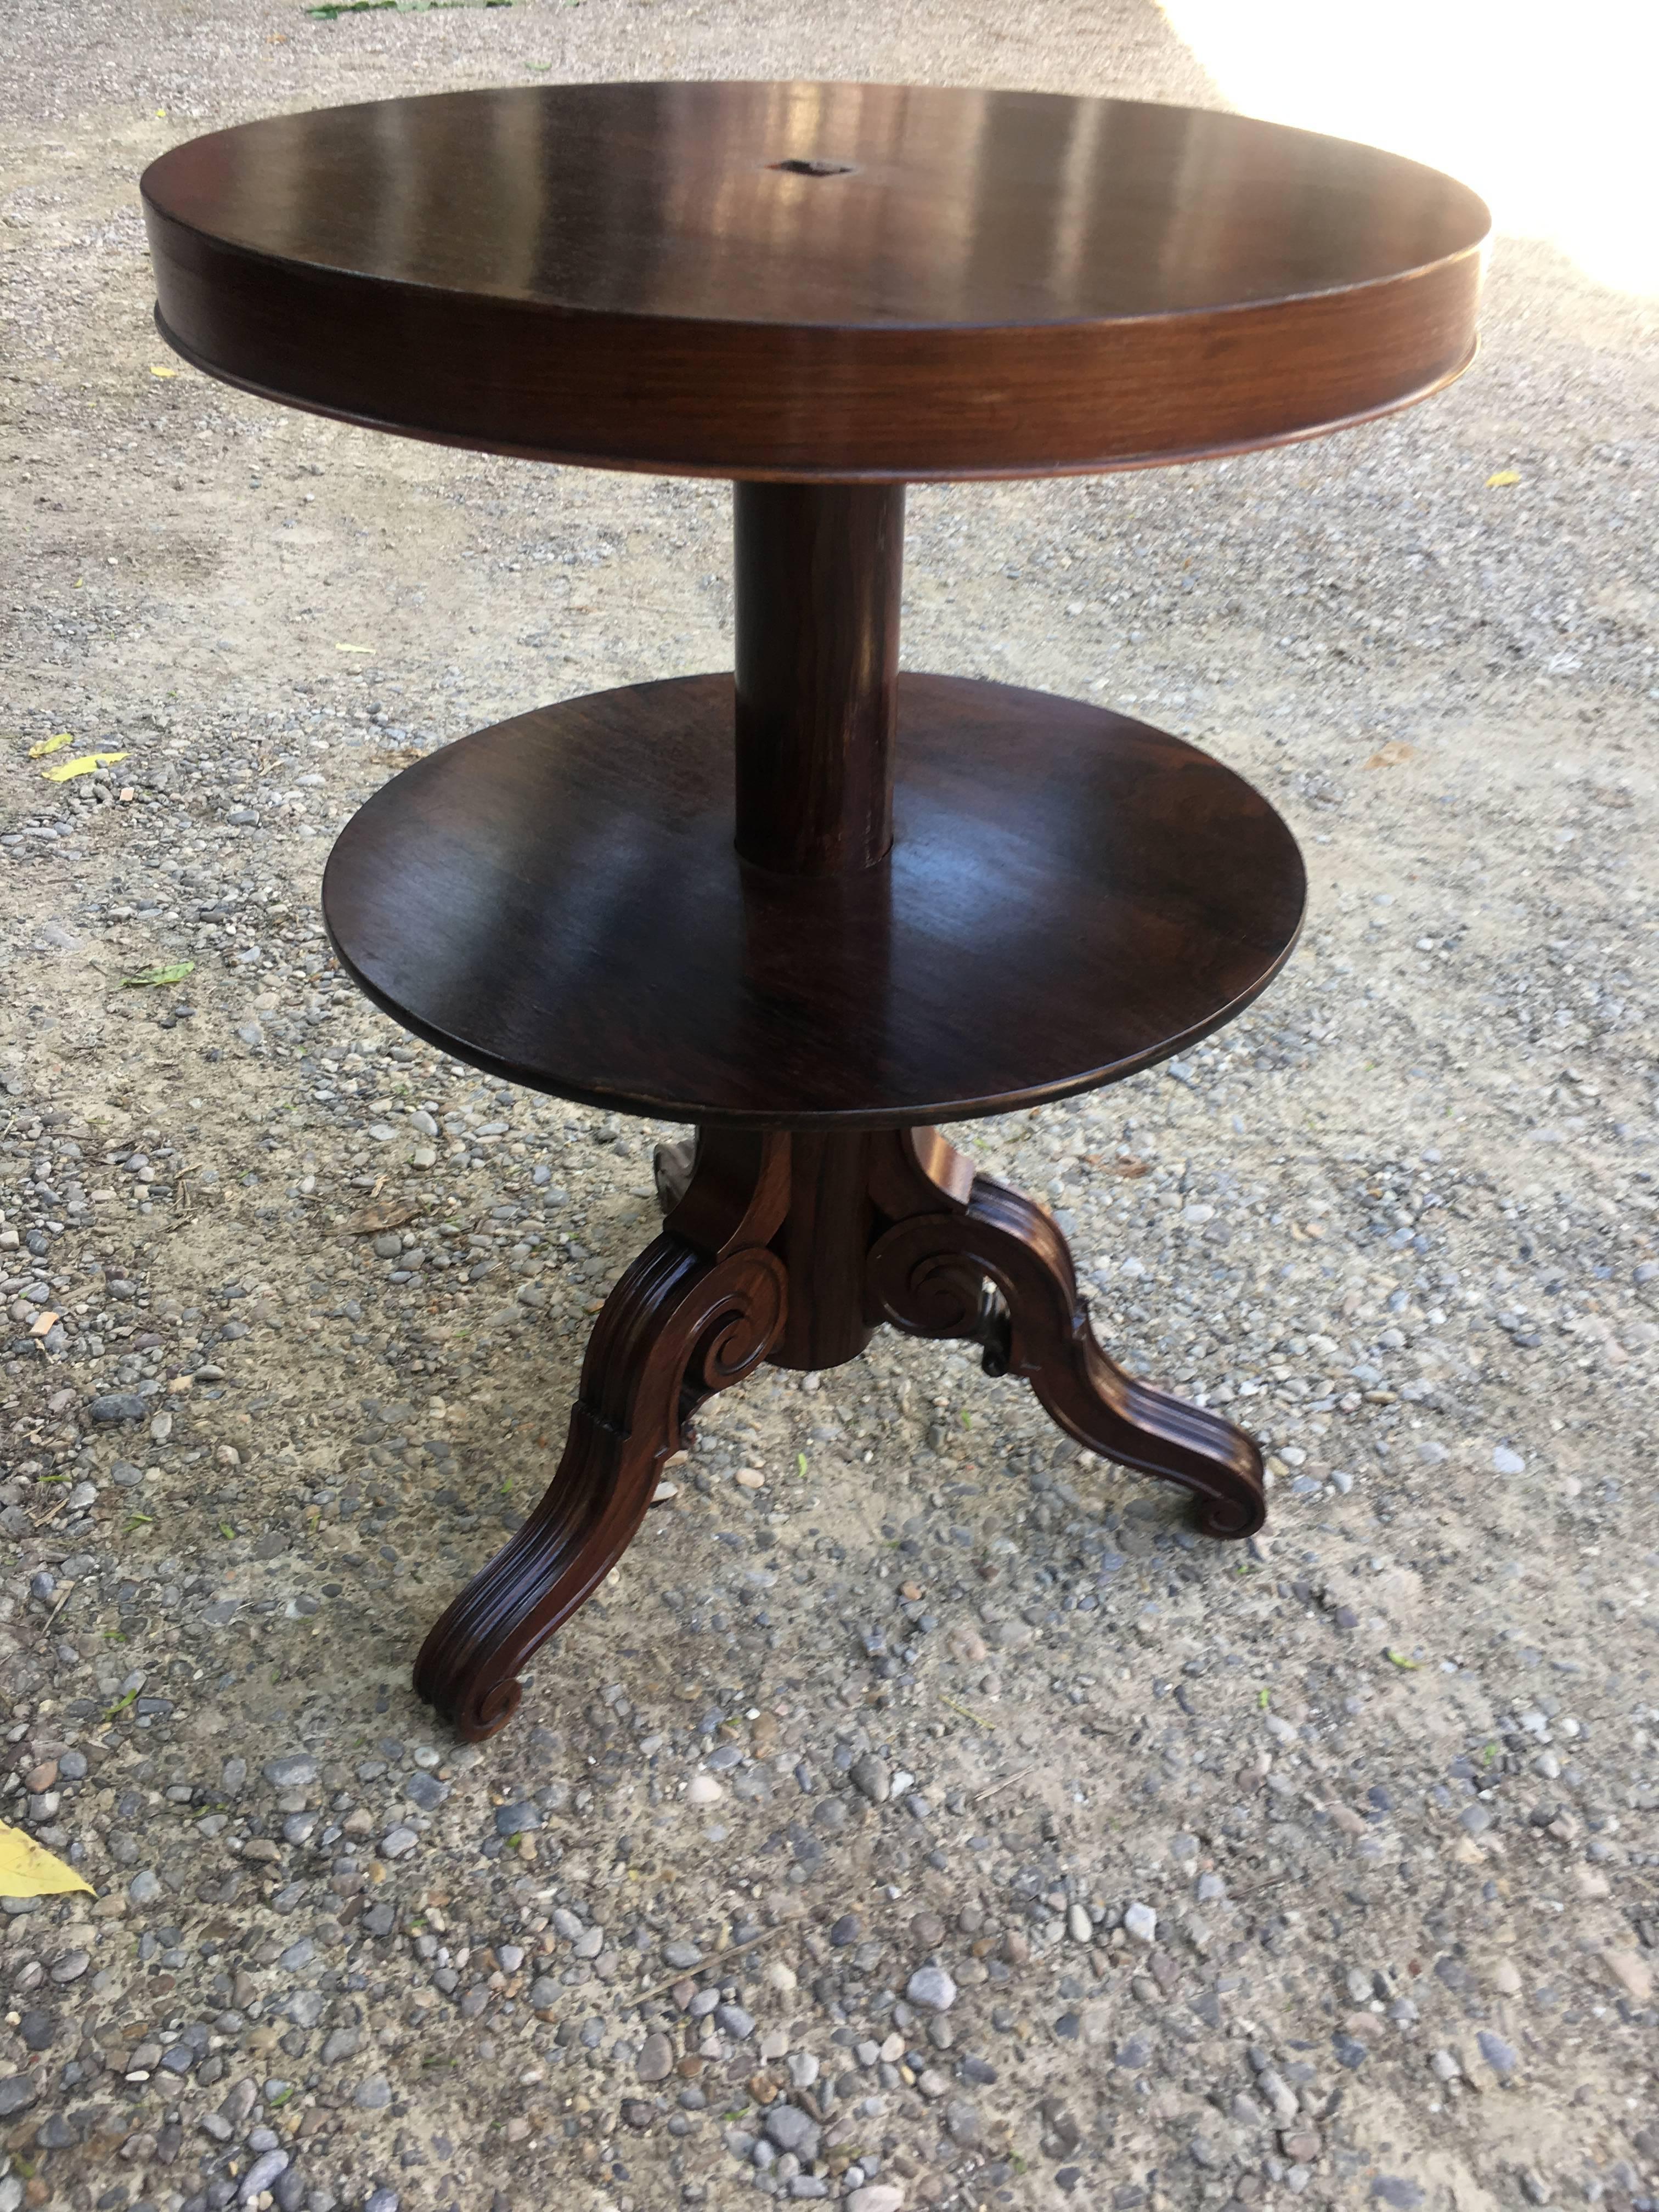 High Victorian English Rosewood Adjustable Round Etagere or Shelves from 1850s For Sale